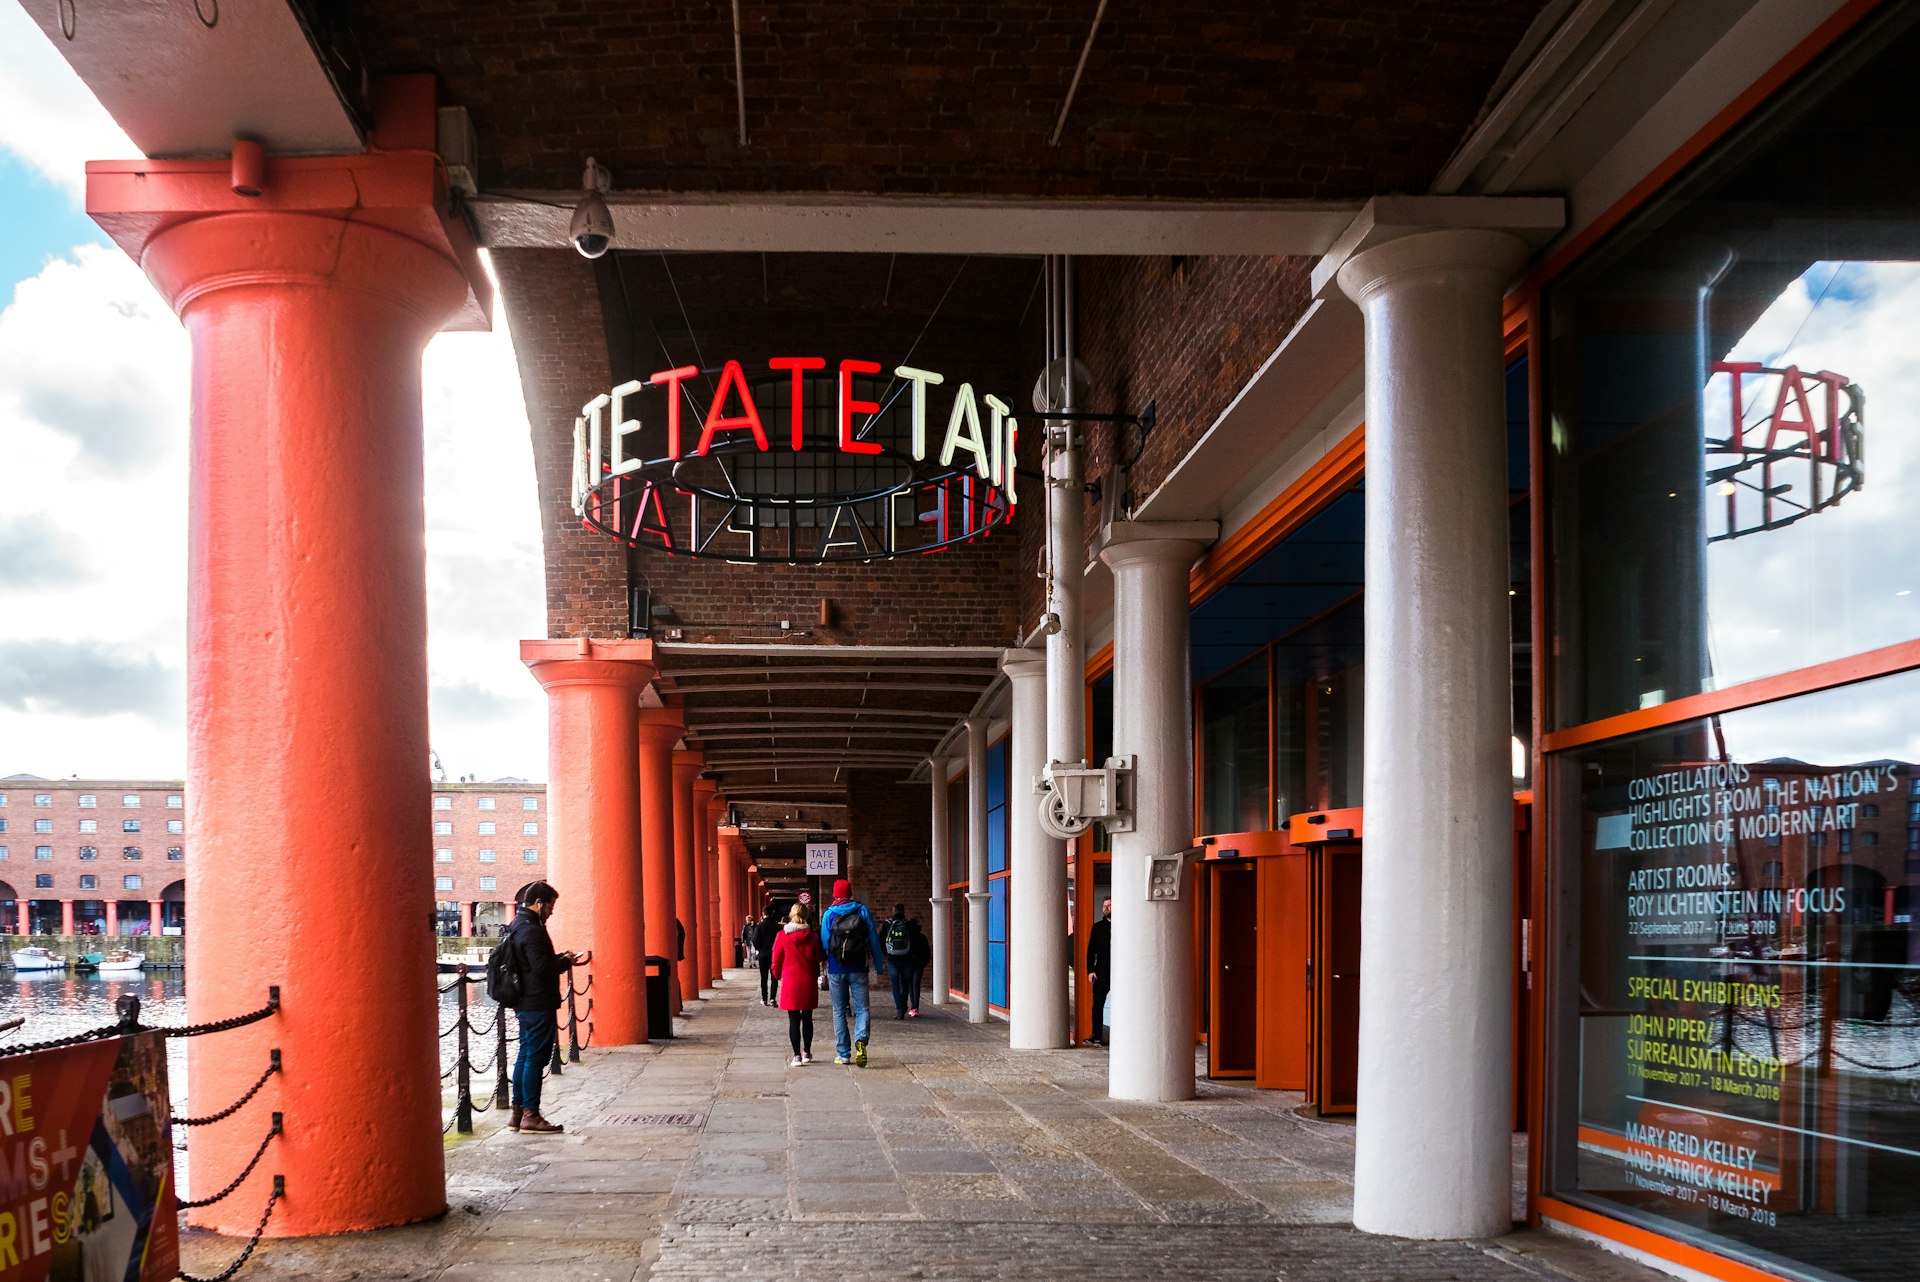 People walking into the Tate Liverpool art gallery in England